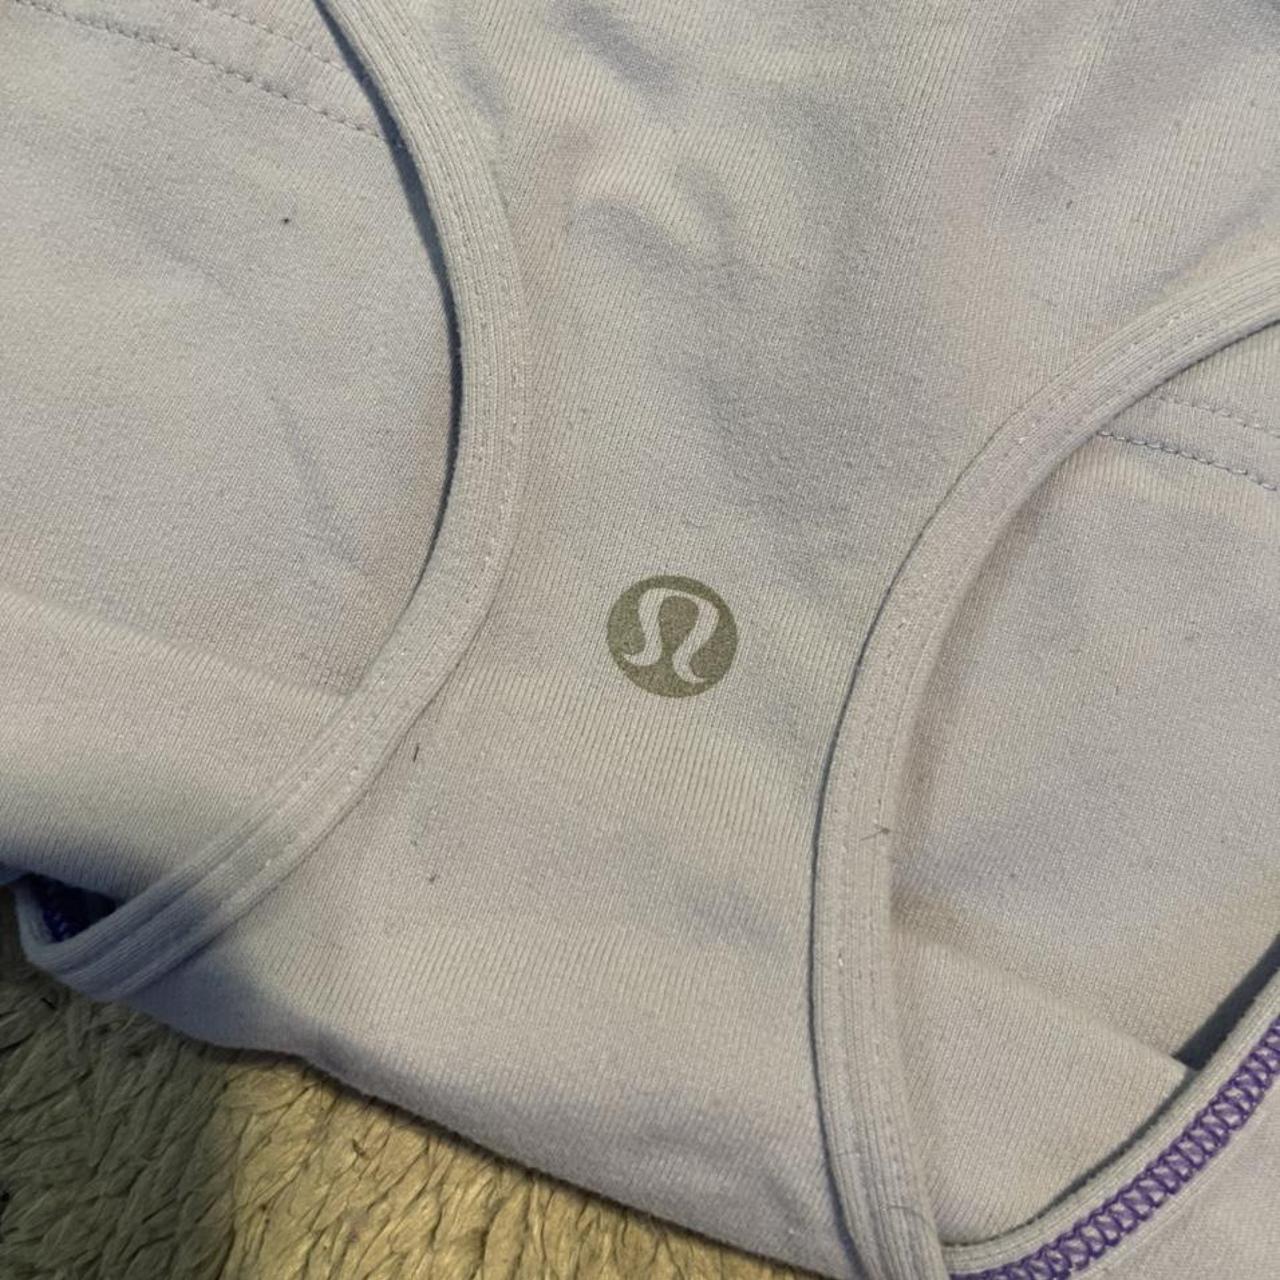 Product Image 4 - Workout Set
Lululemon Tank Top paired